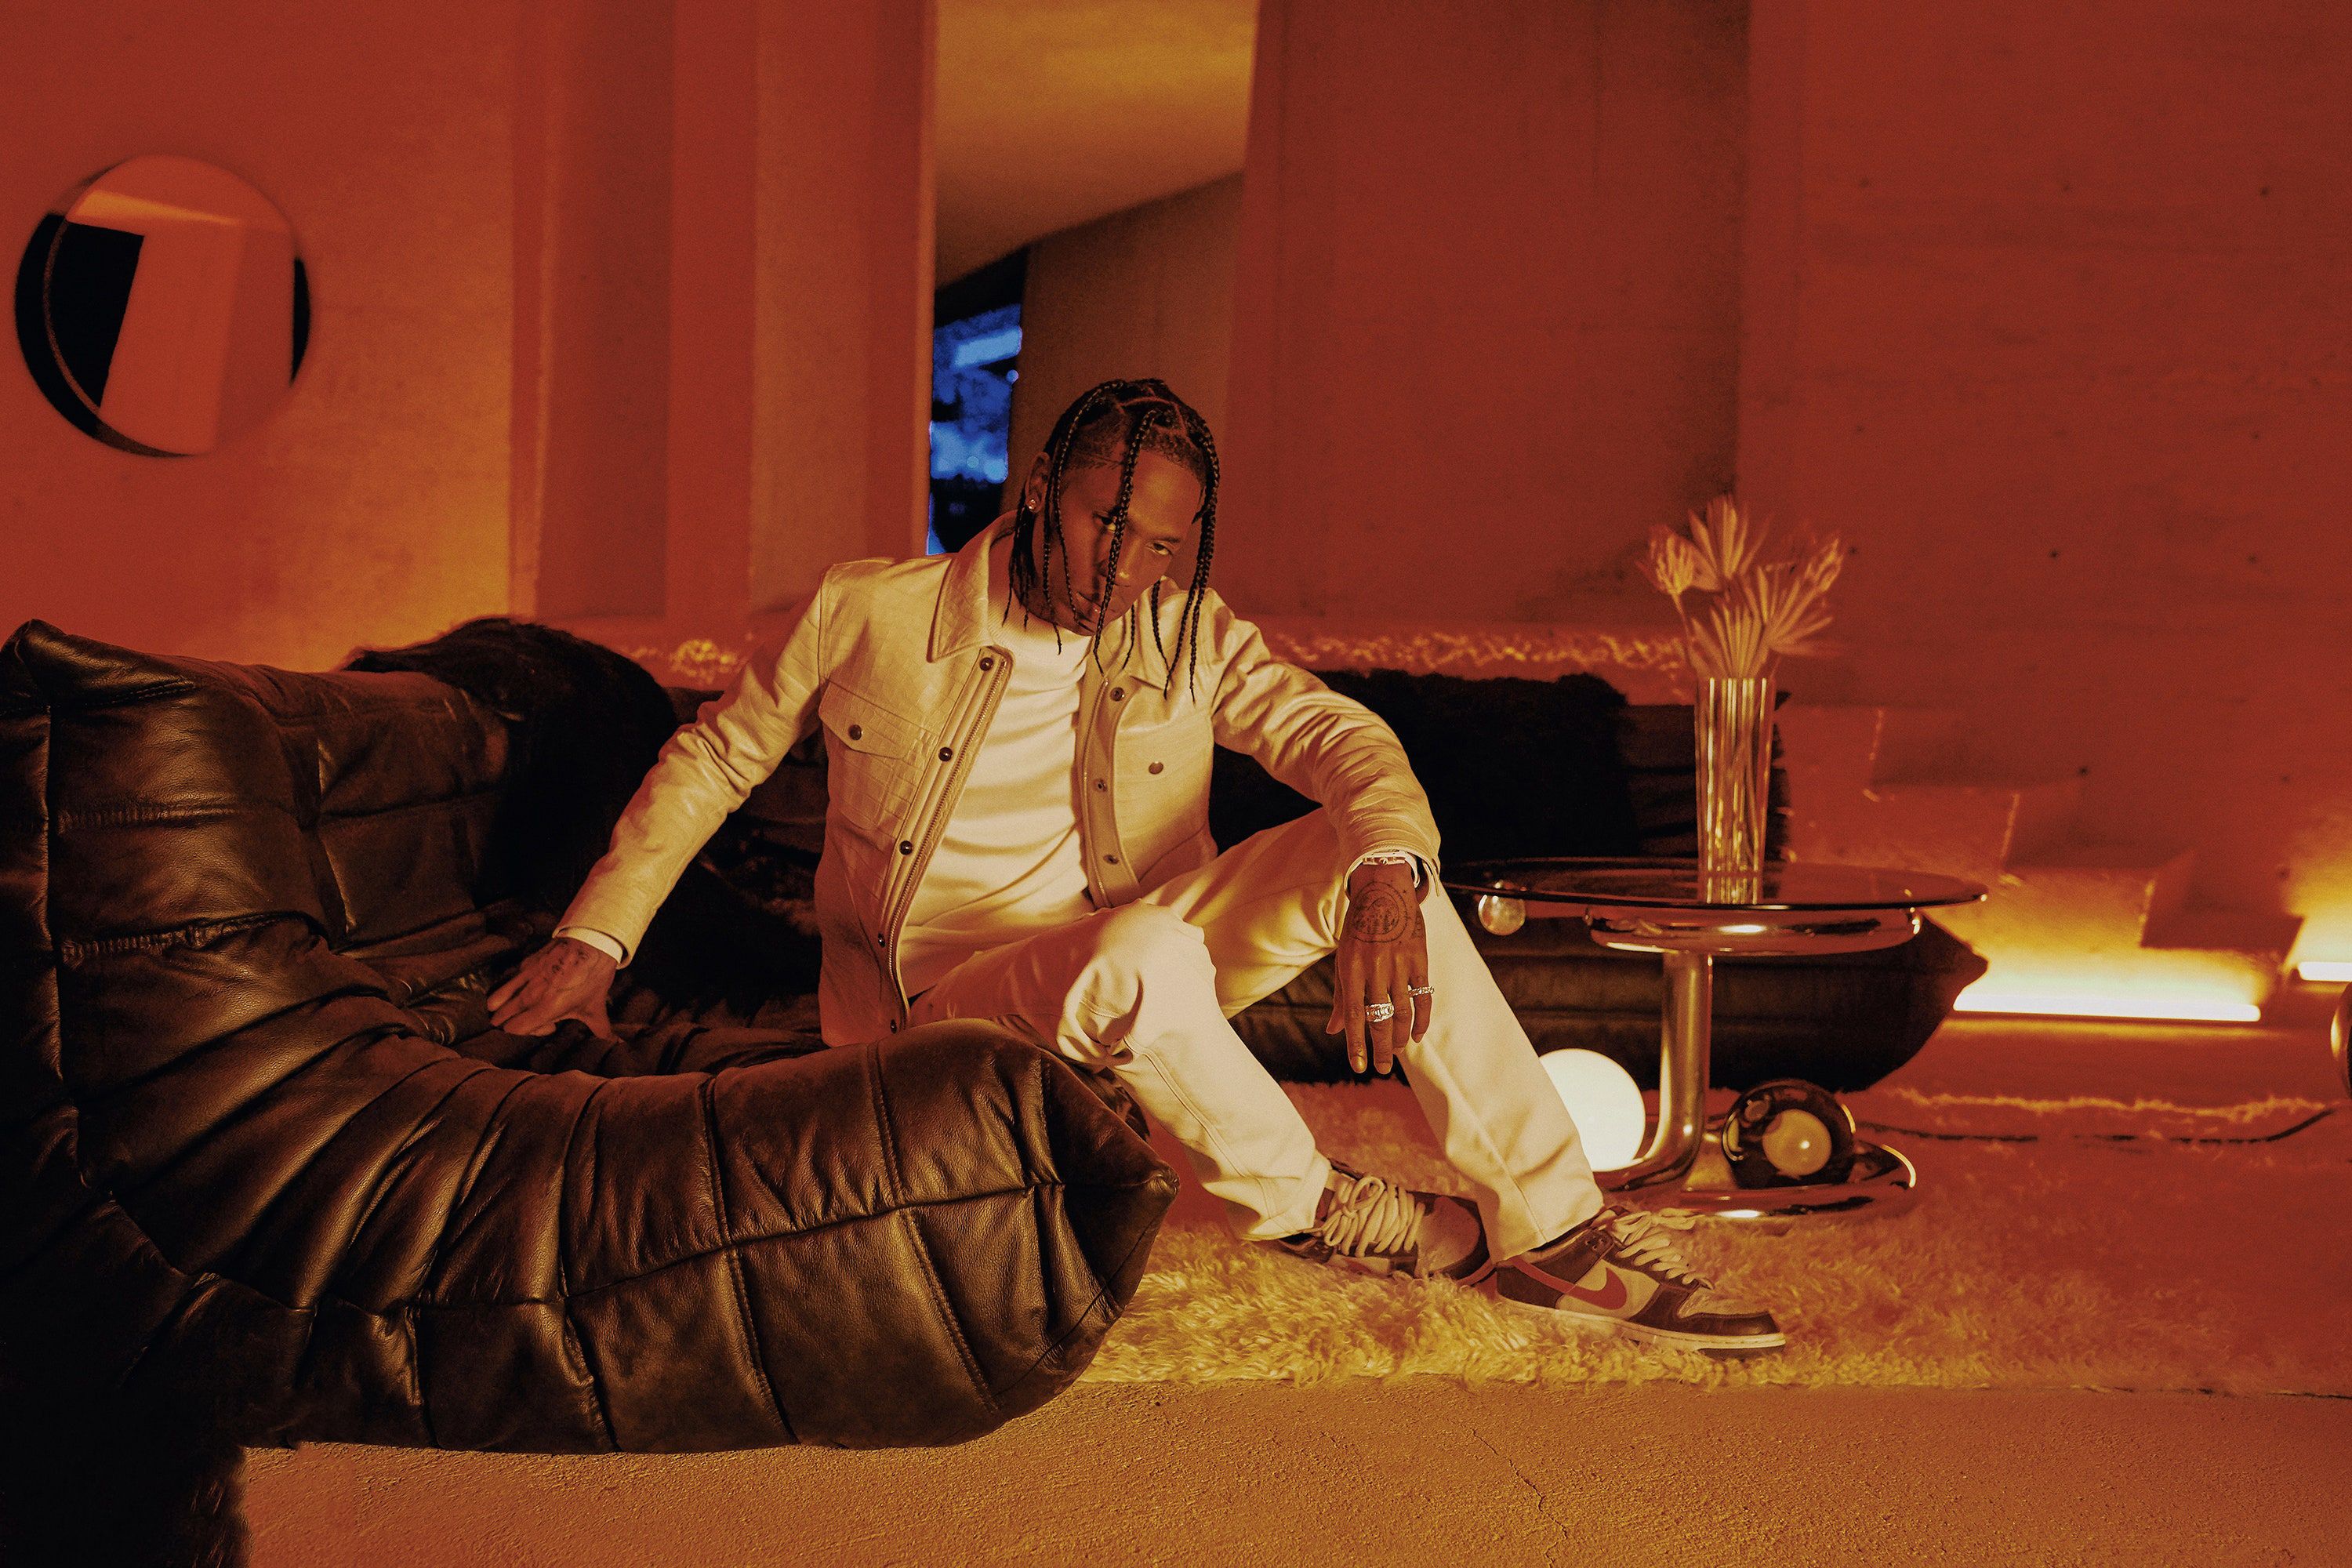 Desktop Wallpaper Travis Scott Scott HD Wallpaper Kolpaper Awesome Free HD Wallpaper, When you boot your computer, there is an initial screen that comes up, in which your folders